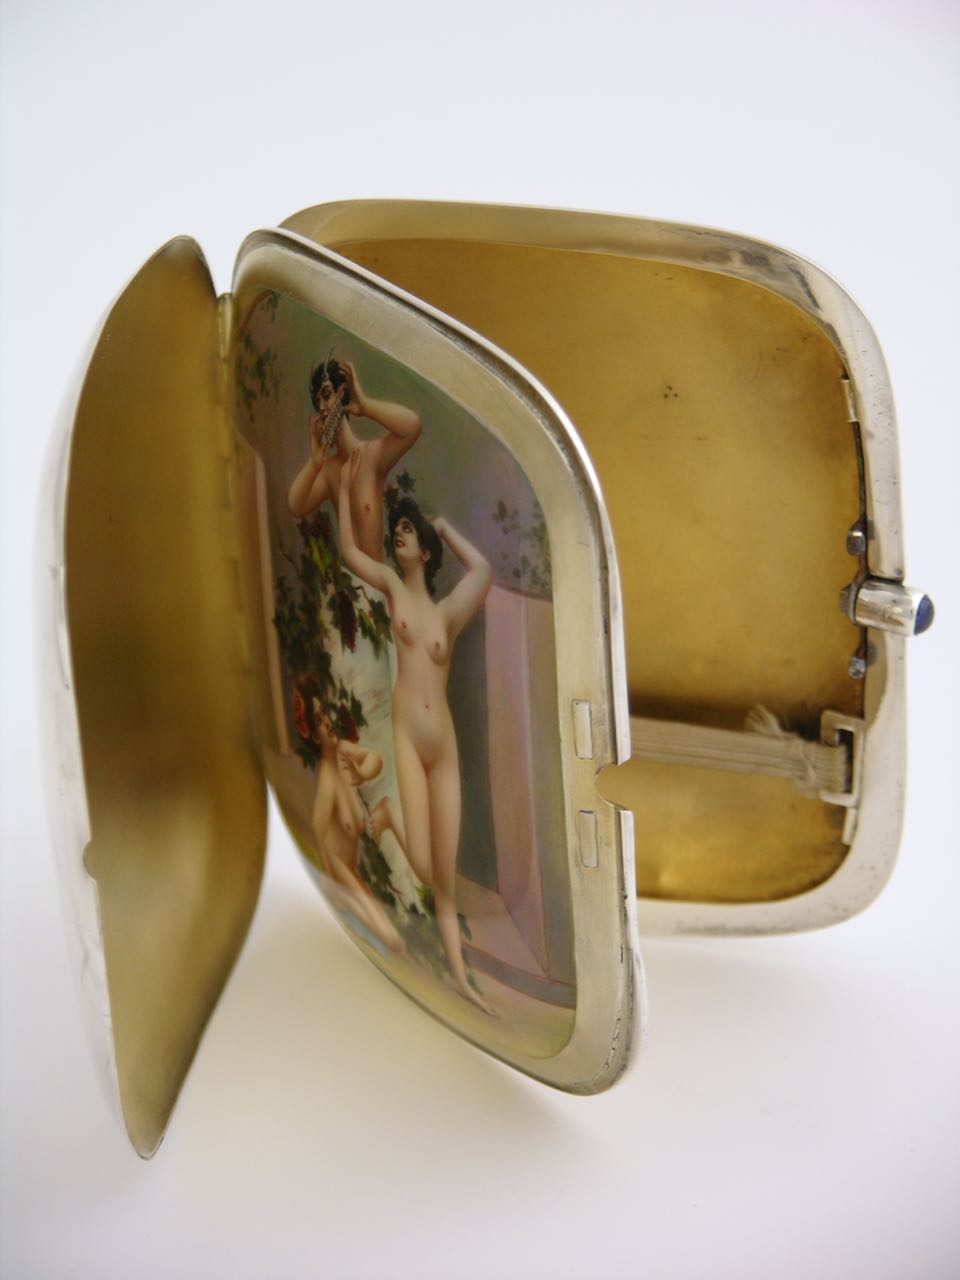 Antique Sterling silver and enamel erotic case "Nymphs and Pan"